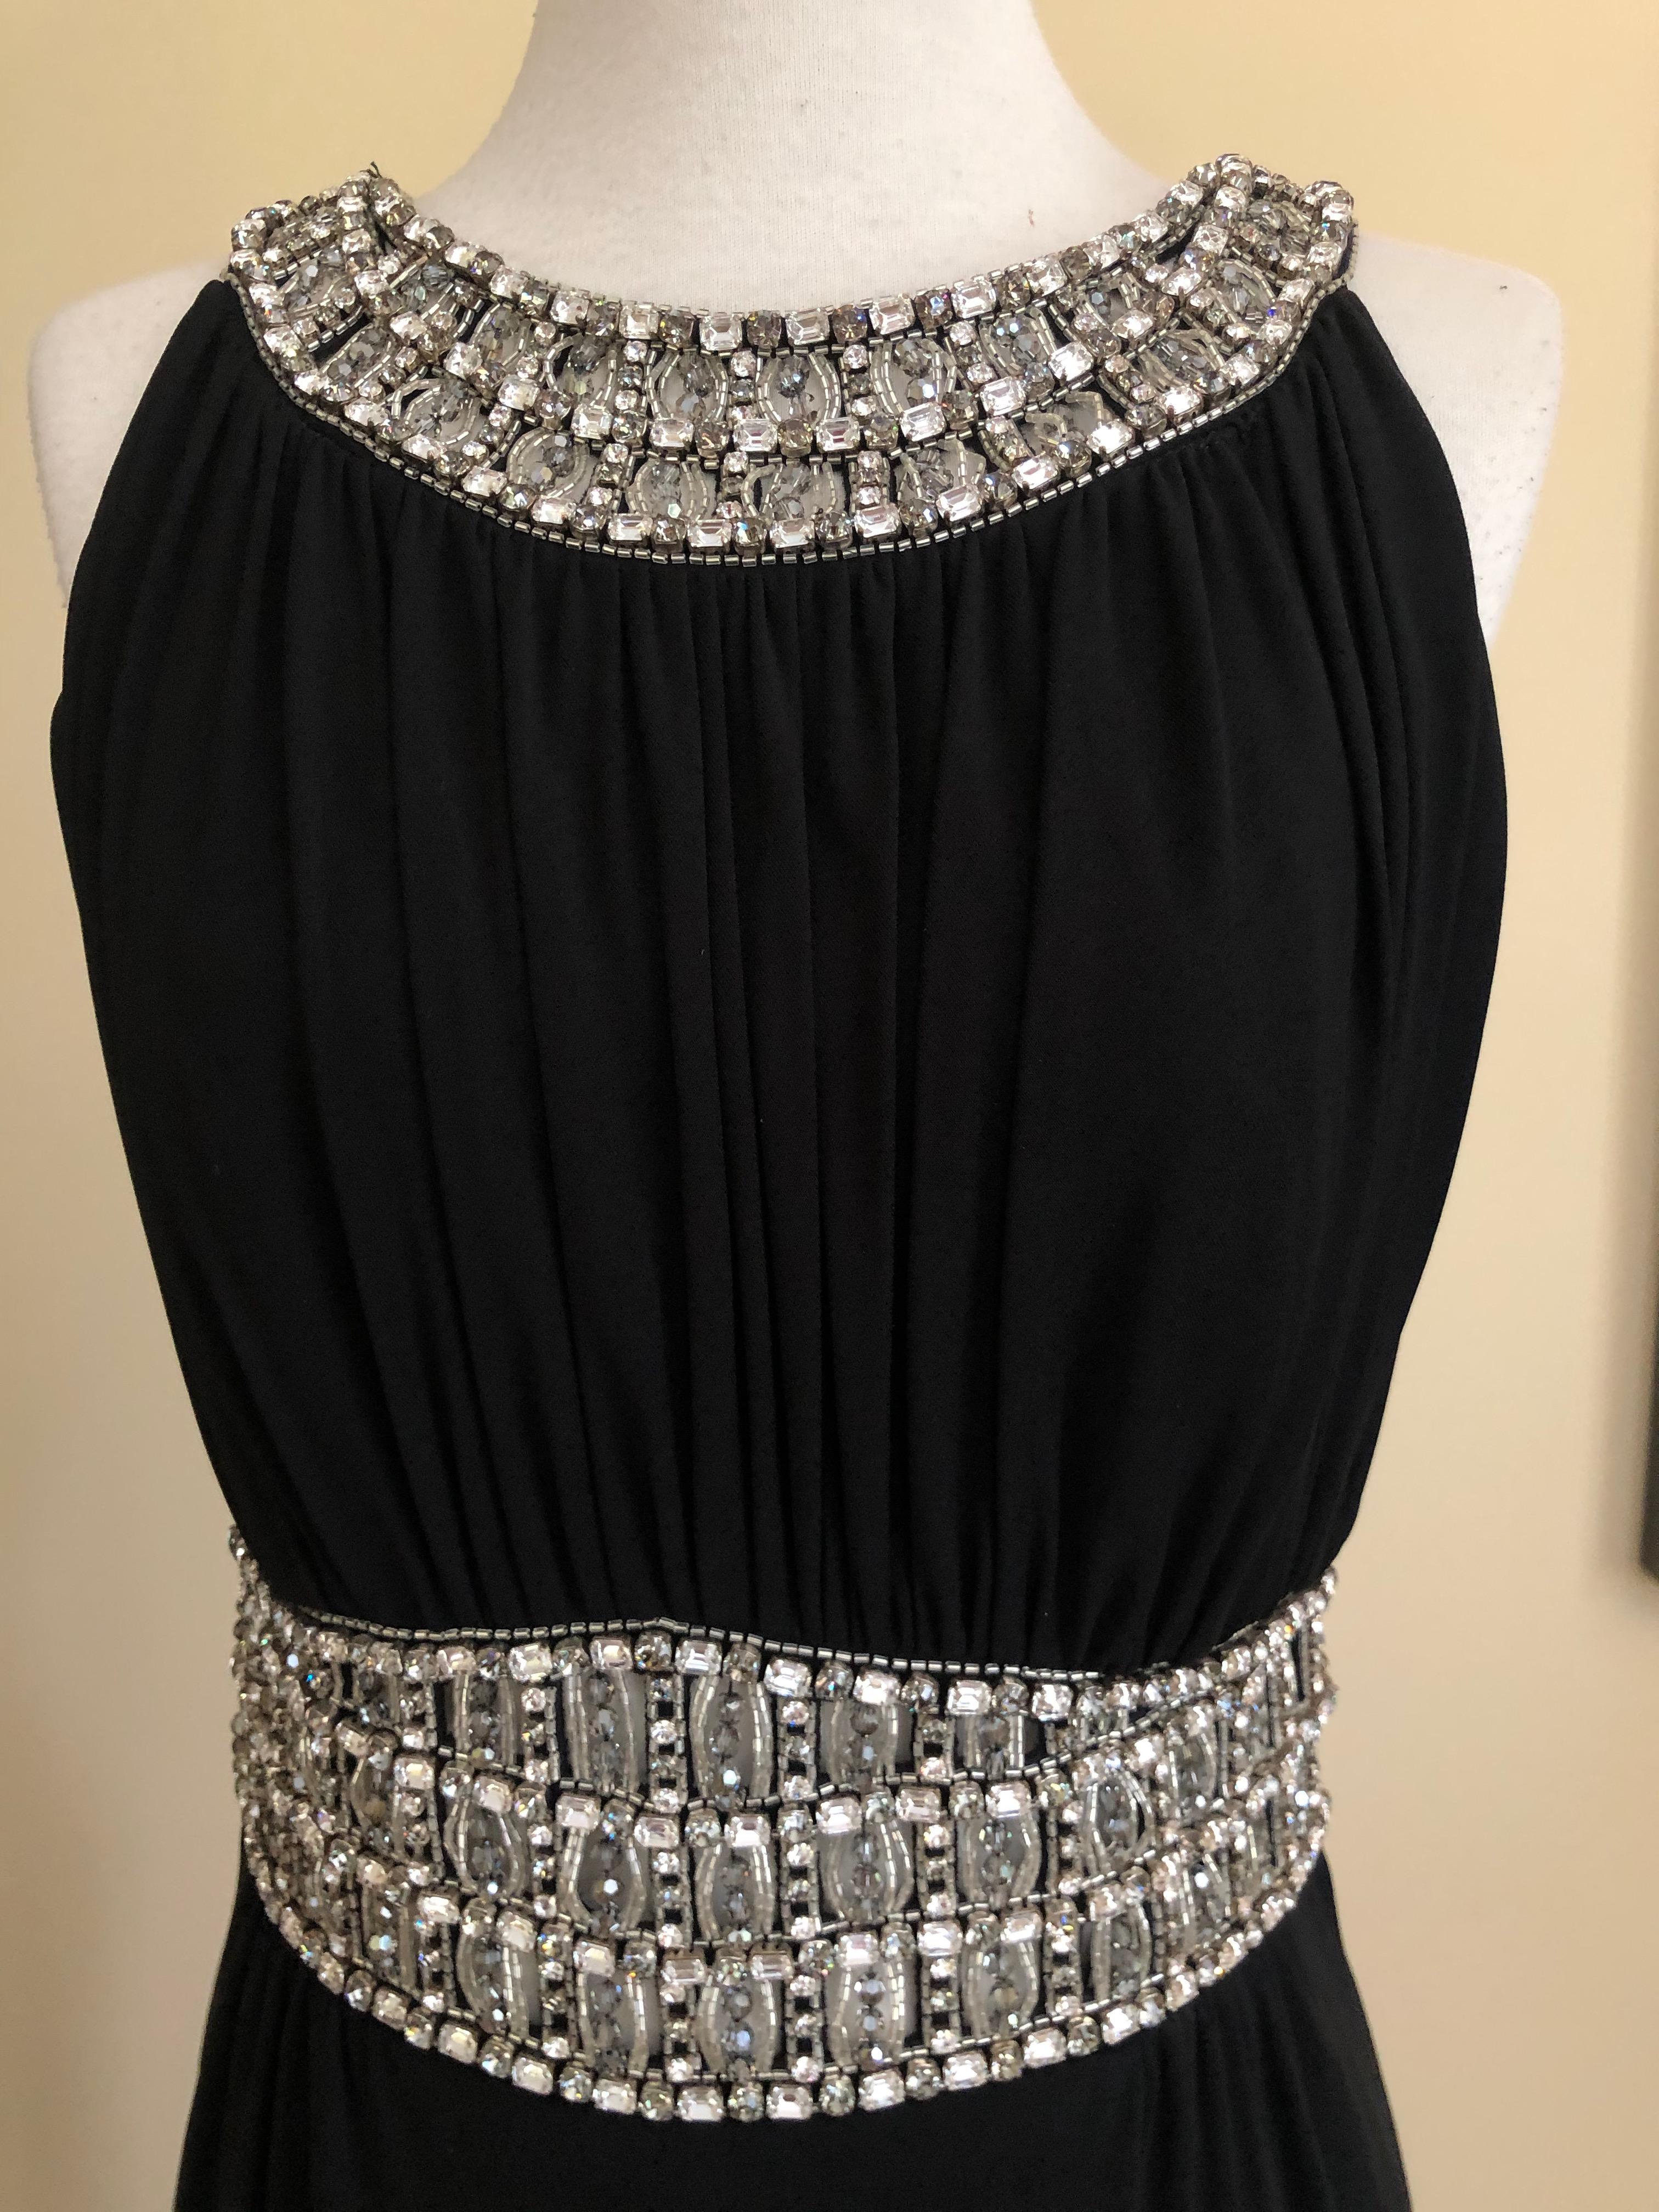 Azzaro Pleated Black Vintage Evening Dress with Jeweled Collar and Belt In Excellent Condition For Sale In Cloverdale, CA